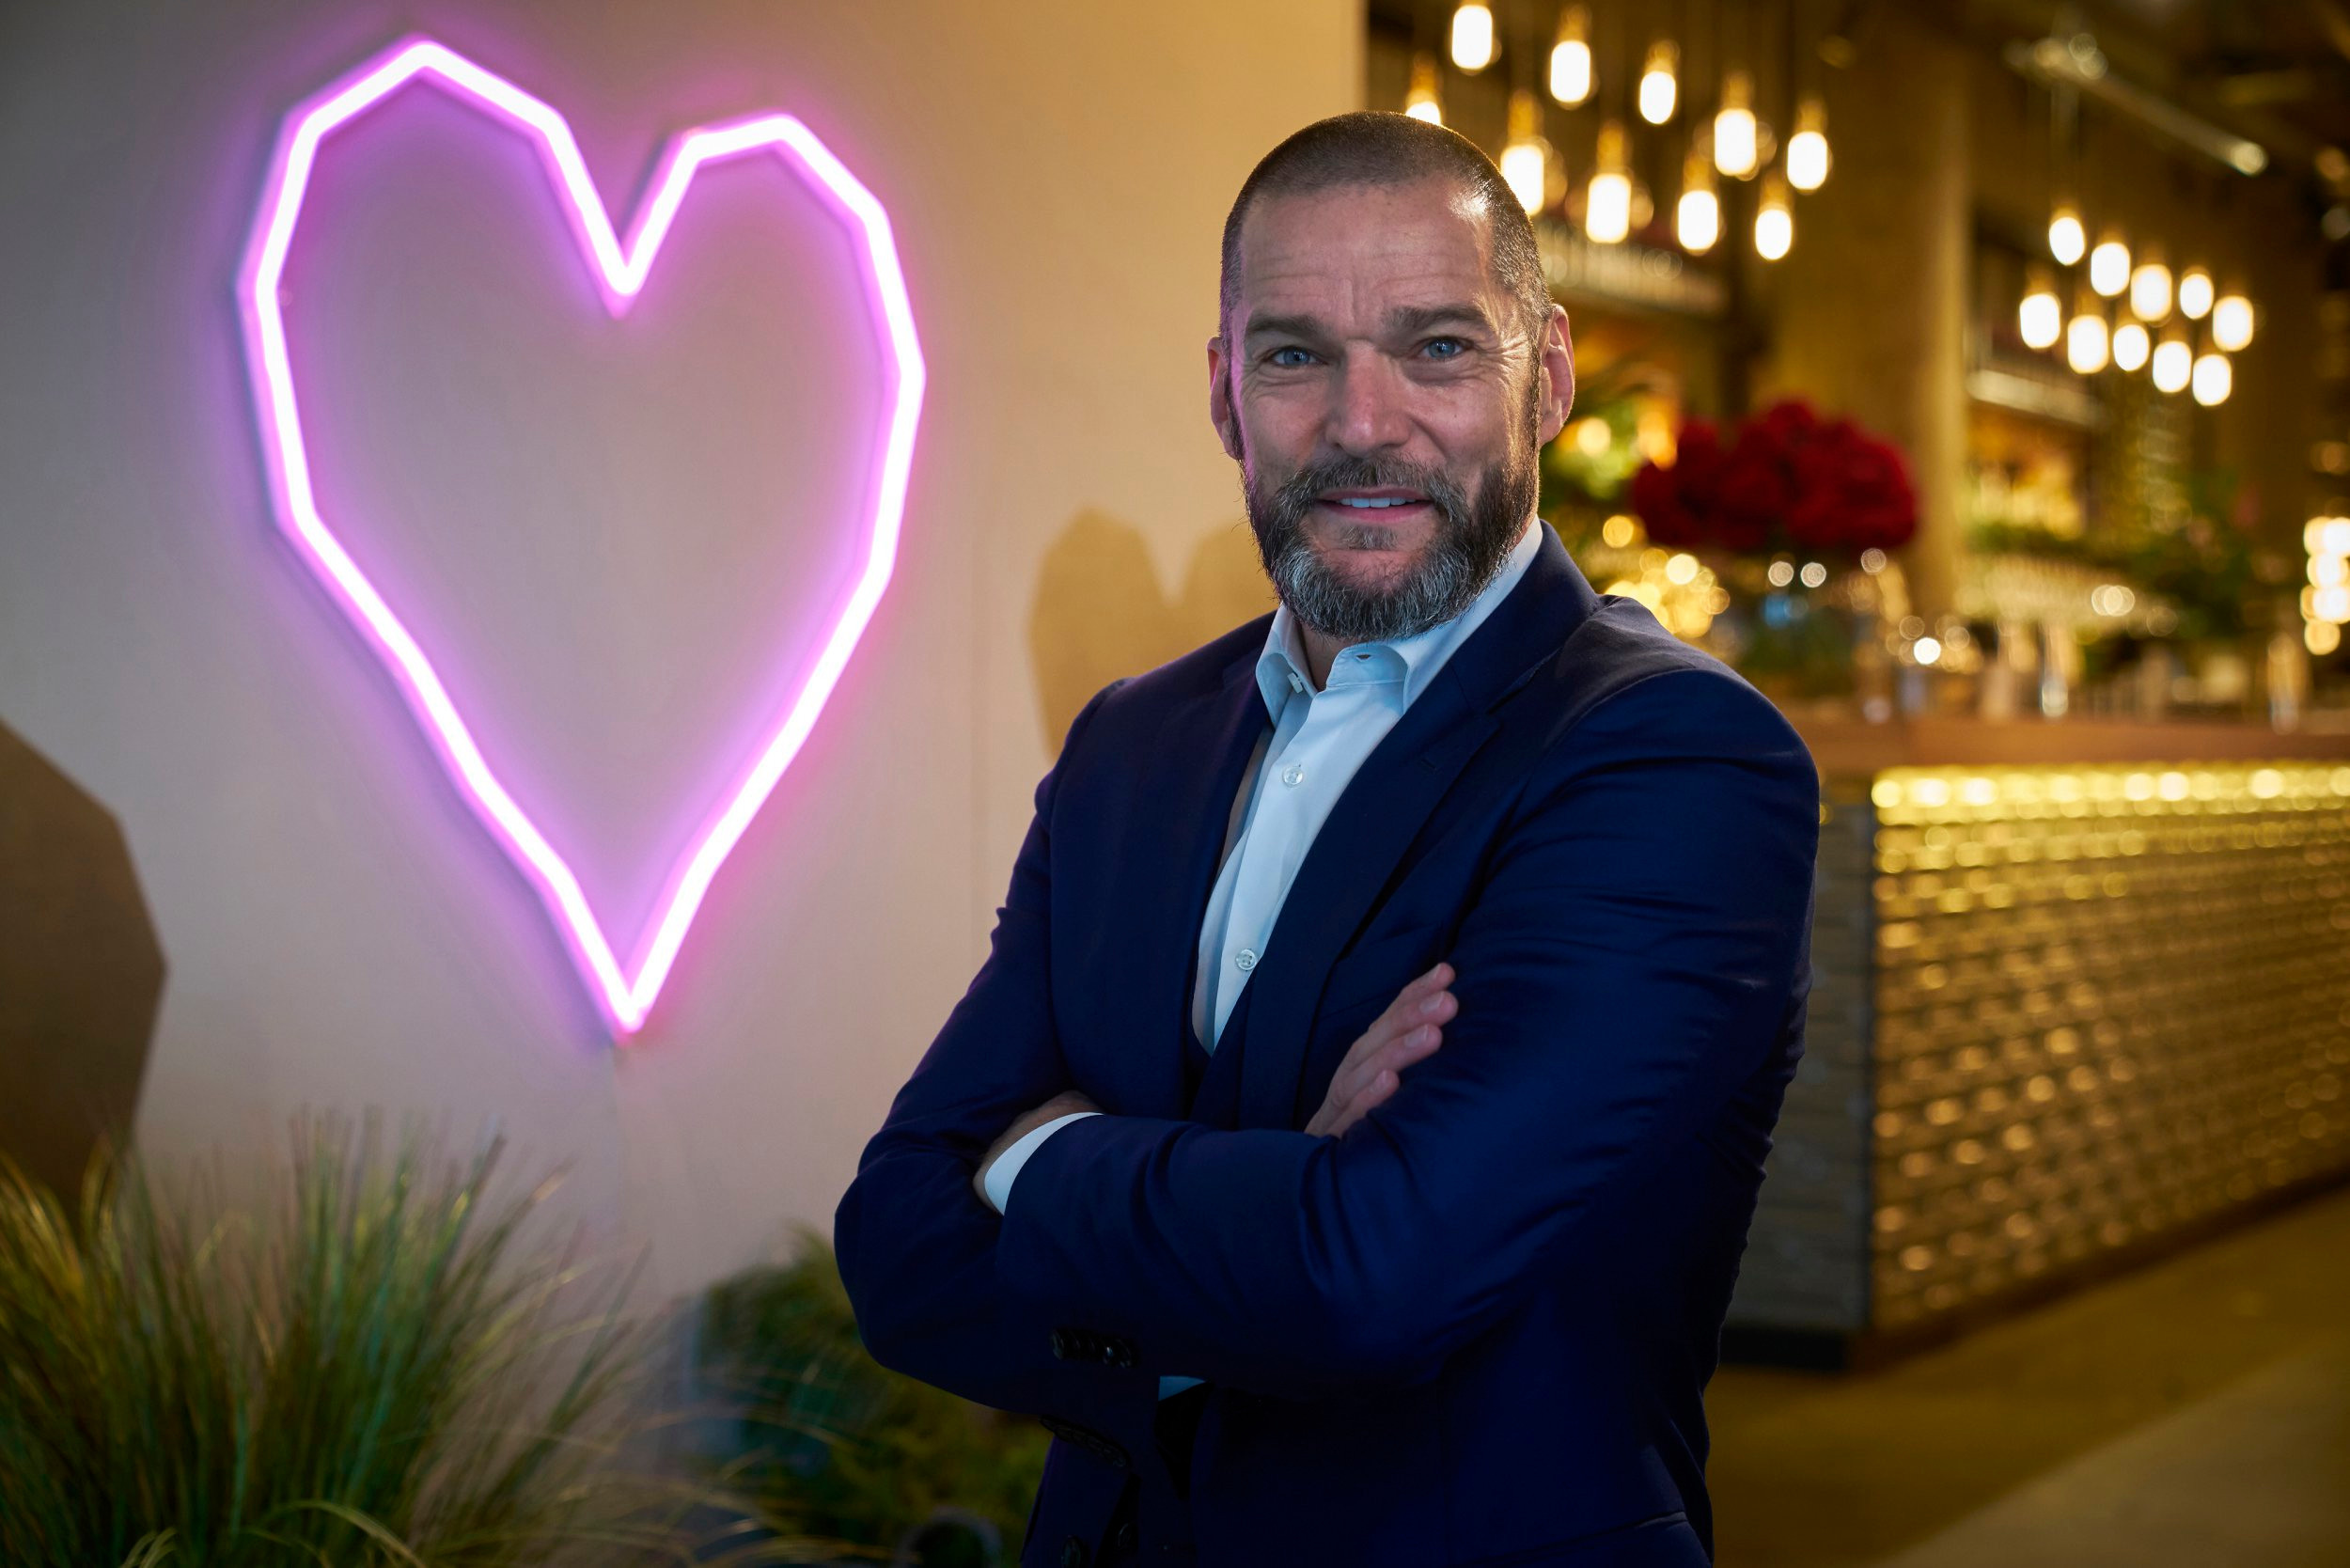 First Dates star Fred Sirieix shares Valentine’s tips for finding love in lockdown